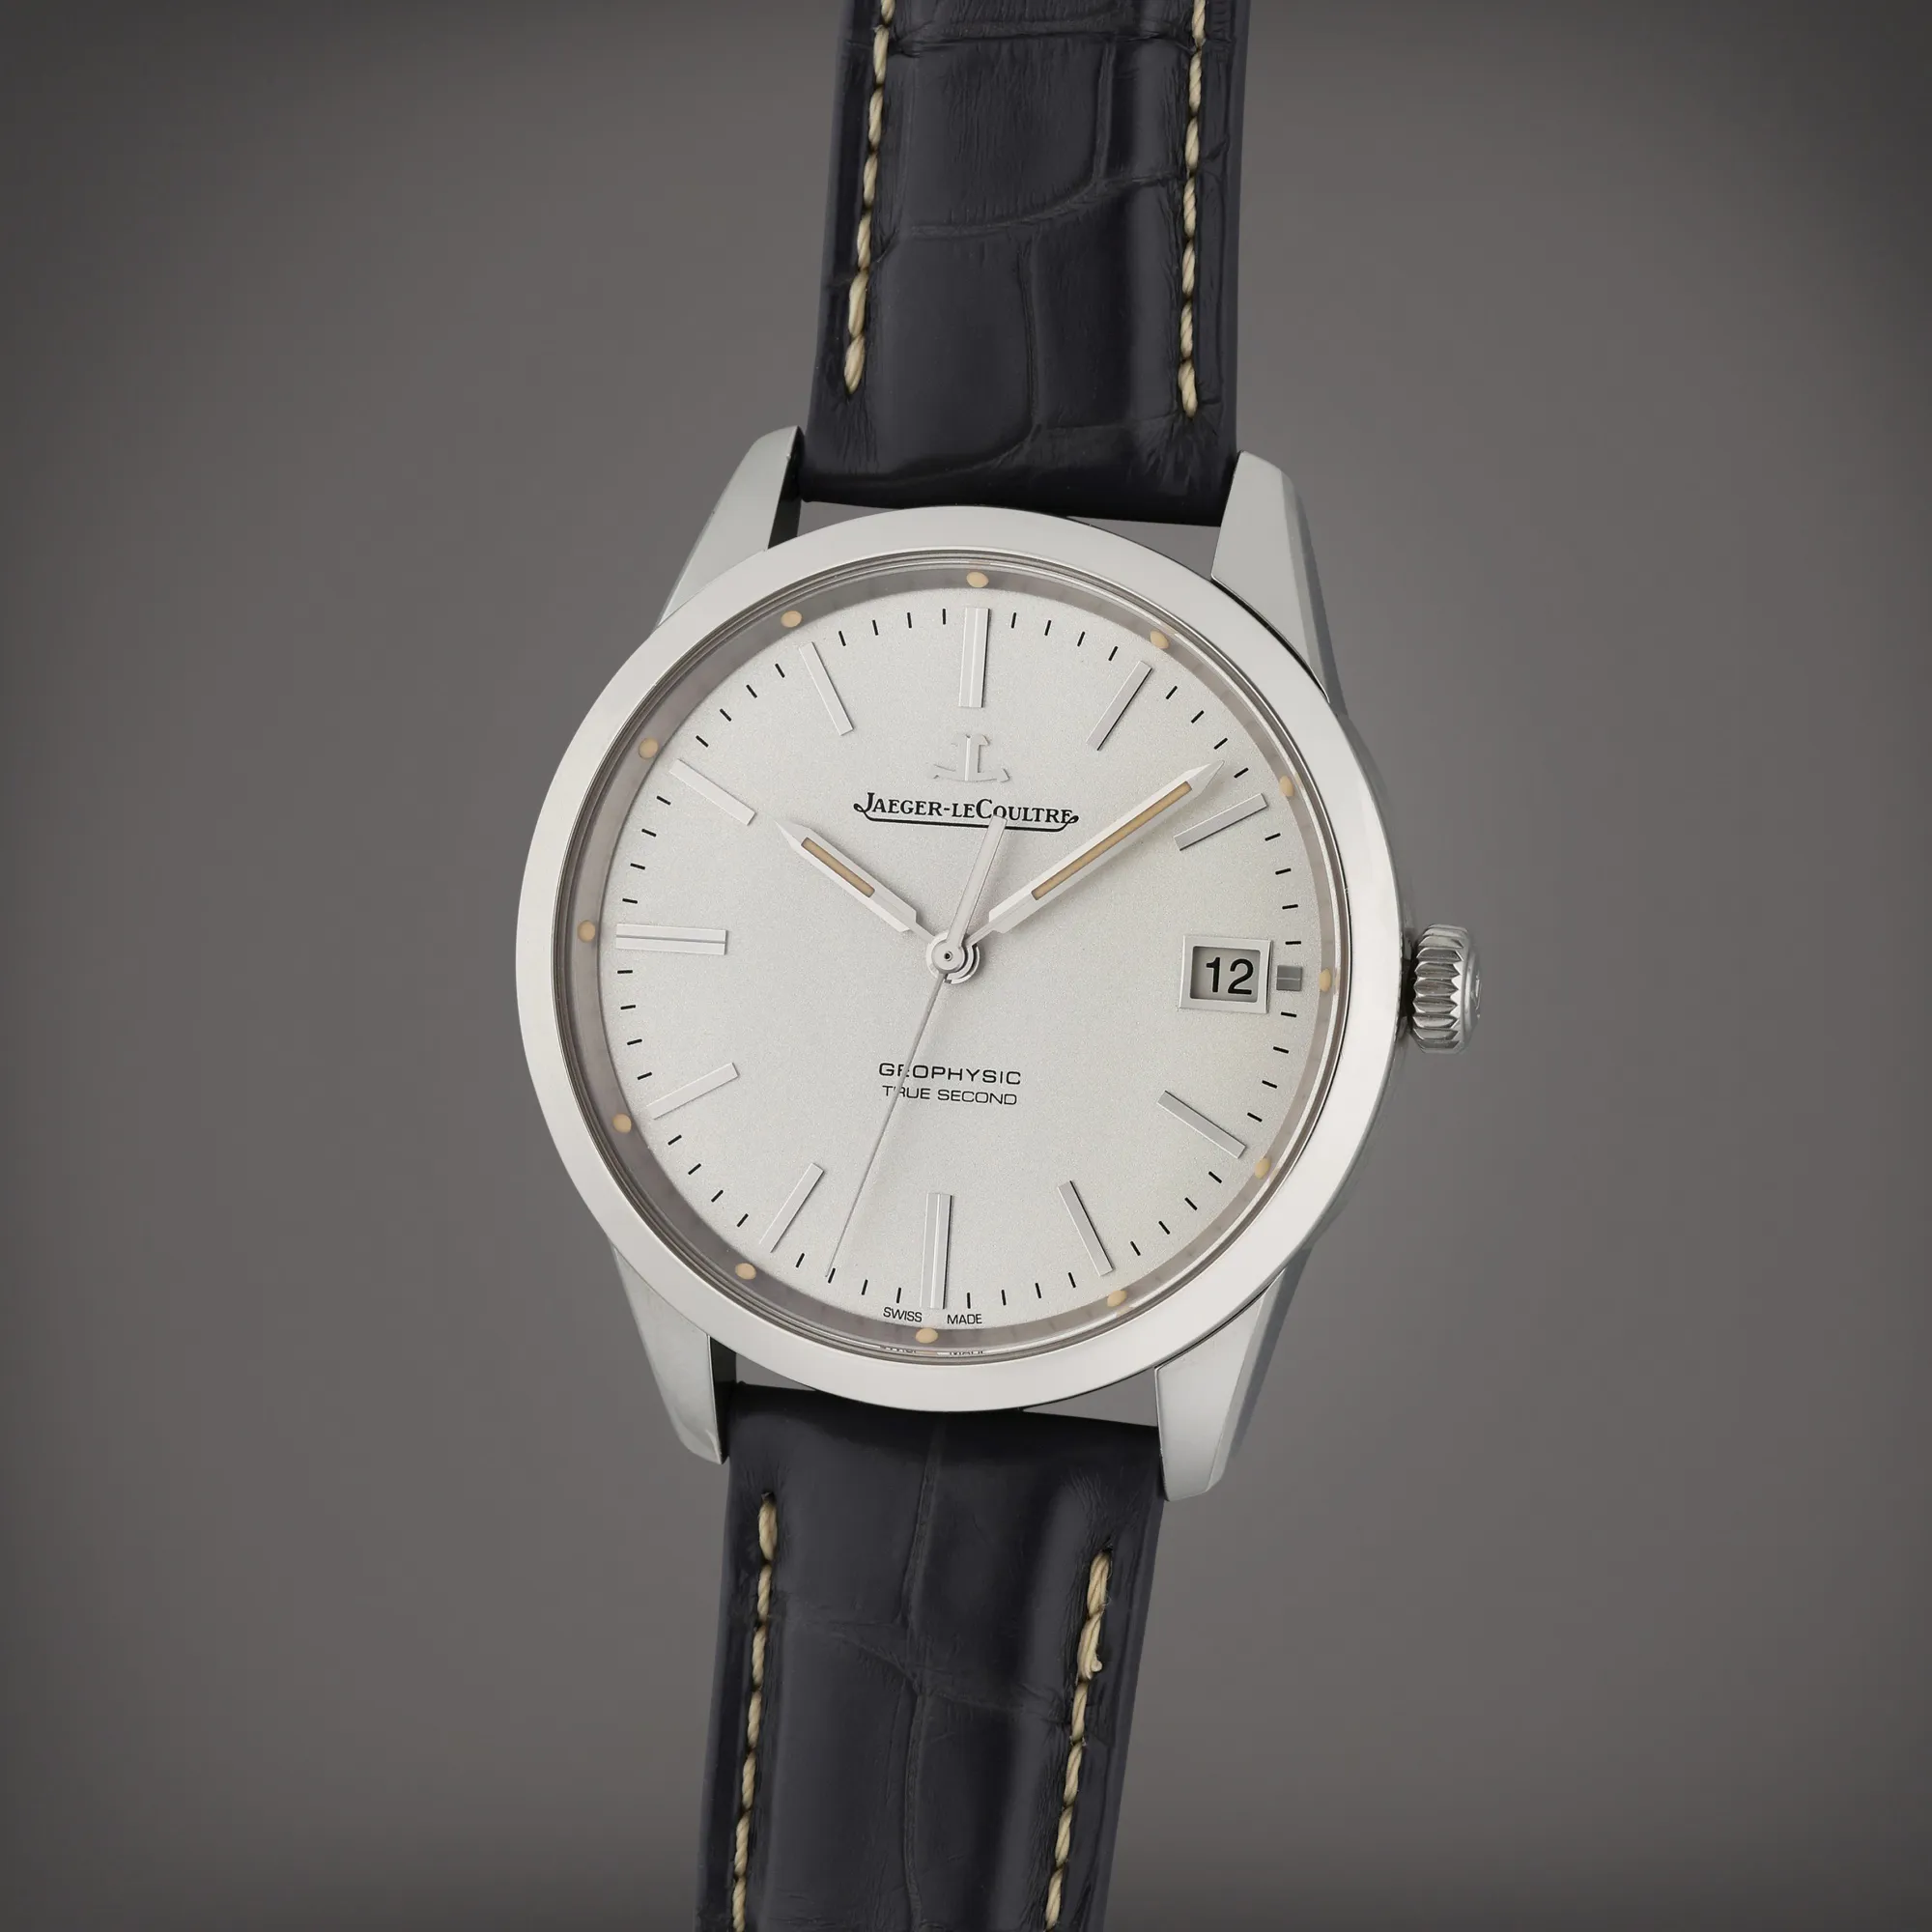 Jaeger-LeCoultre Geophysic 501.8.TO.S nullmm